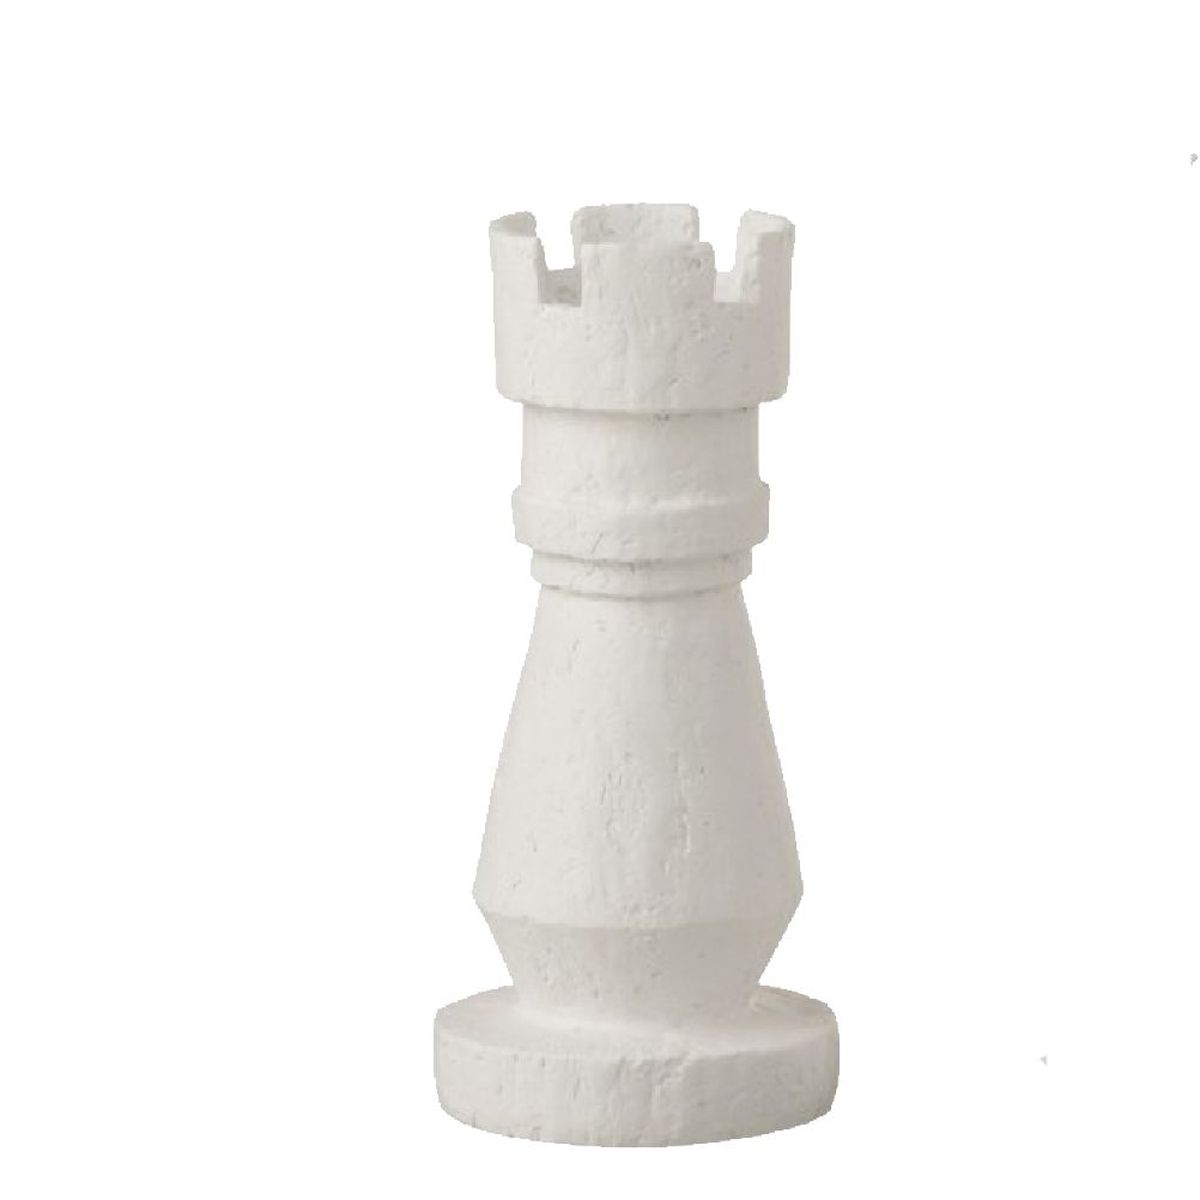 name of tower piece in chess